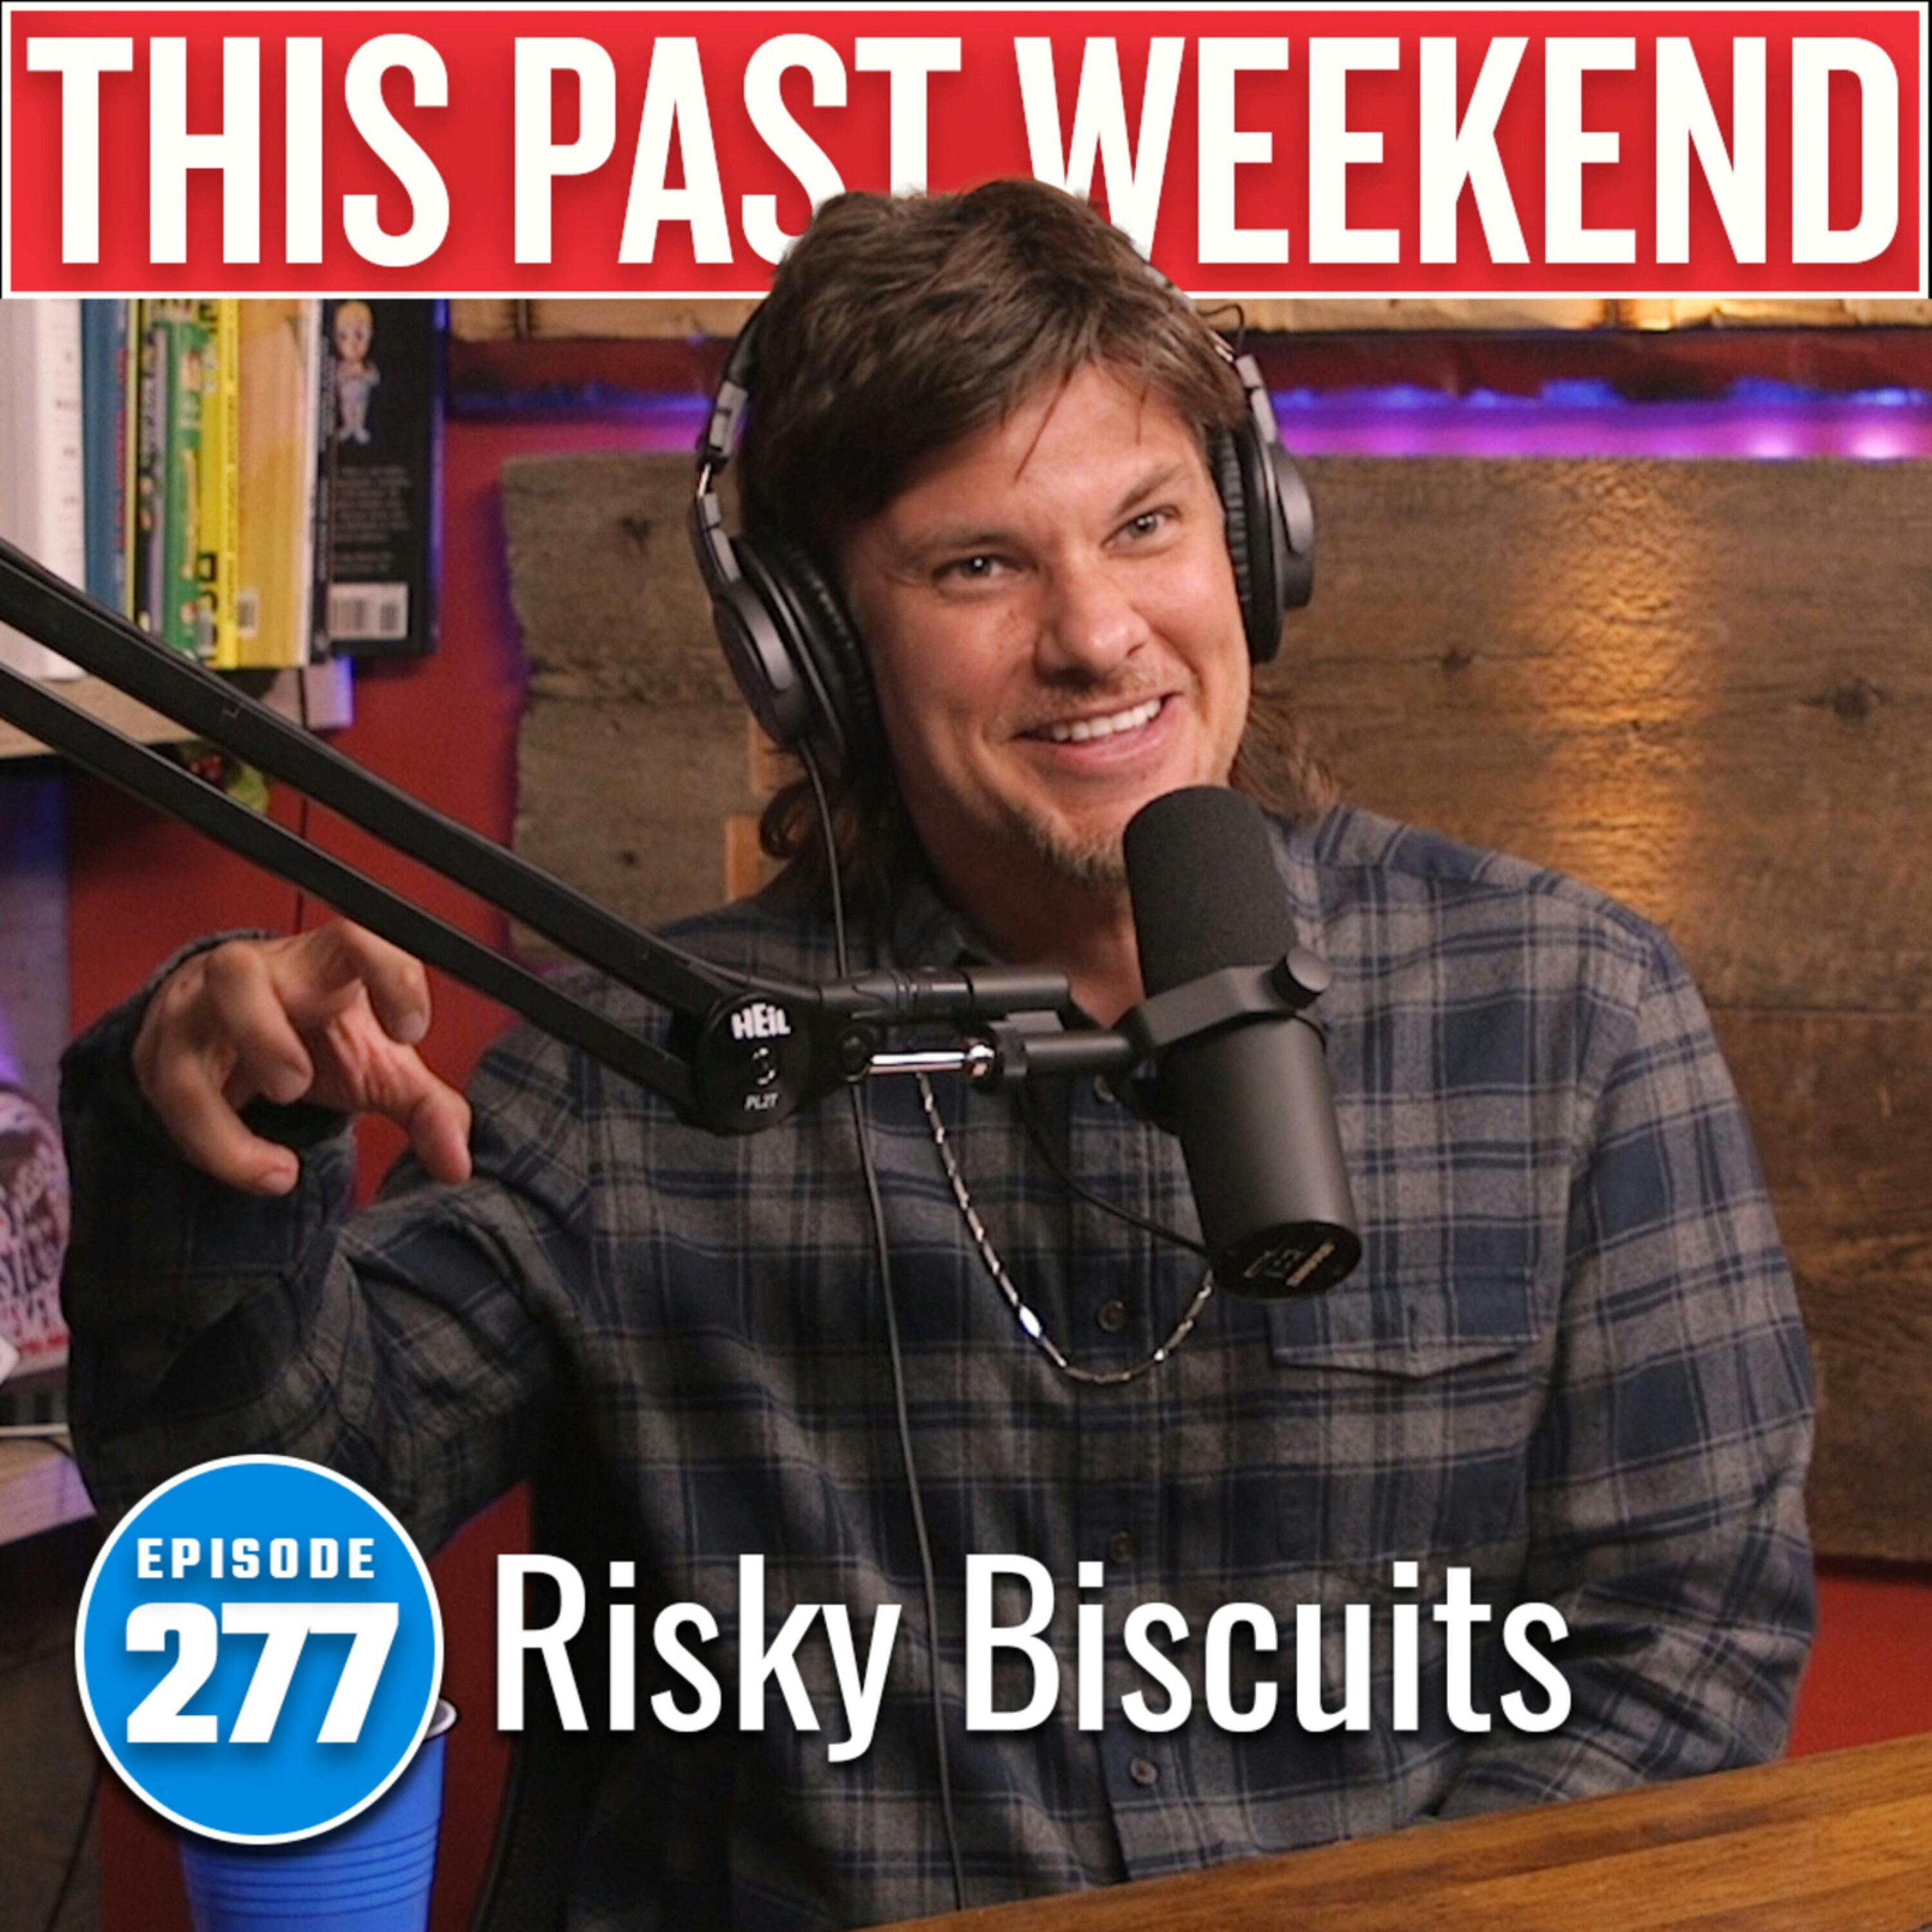 Risky Biscuits | This Past Weekend #277